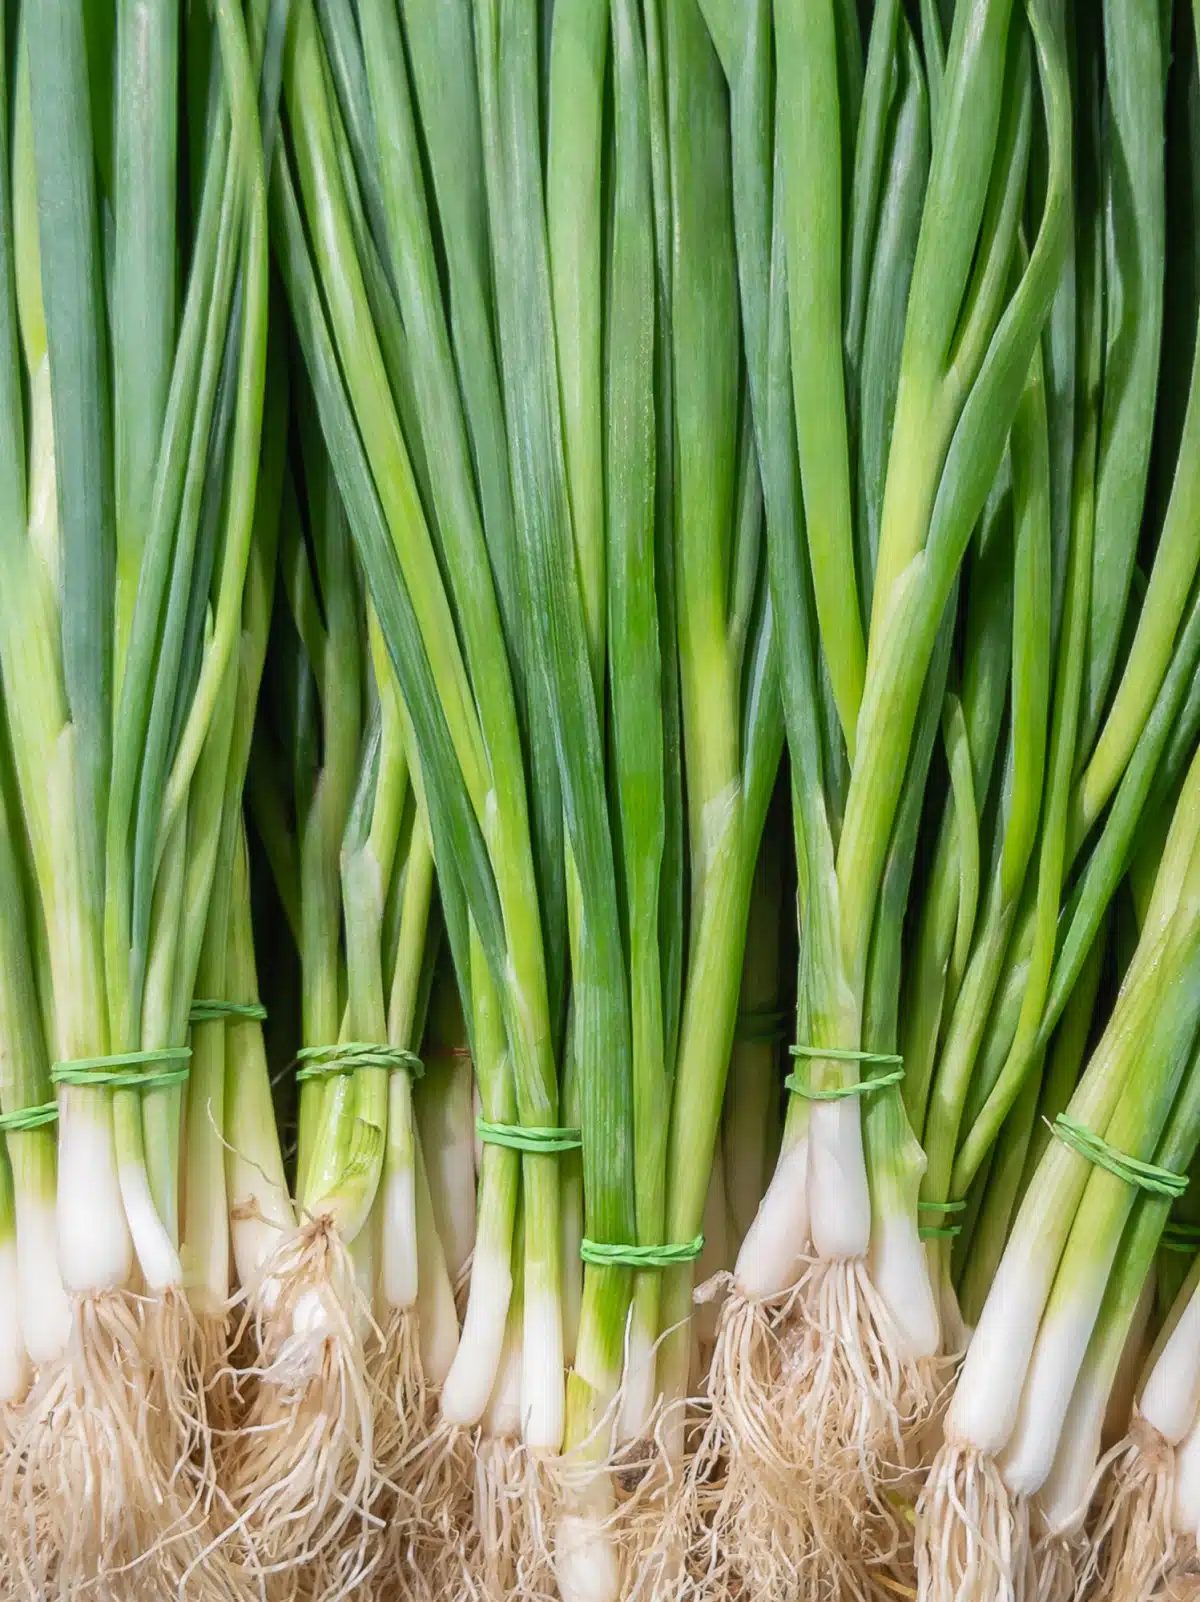 bunches of scallions